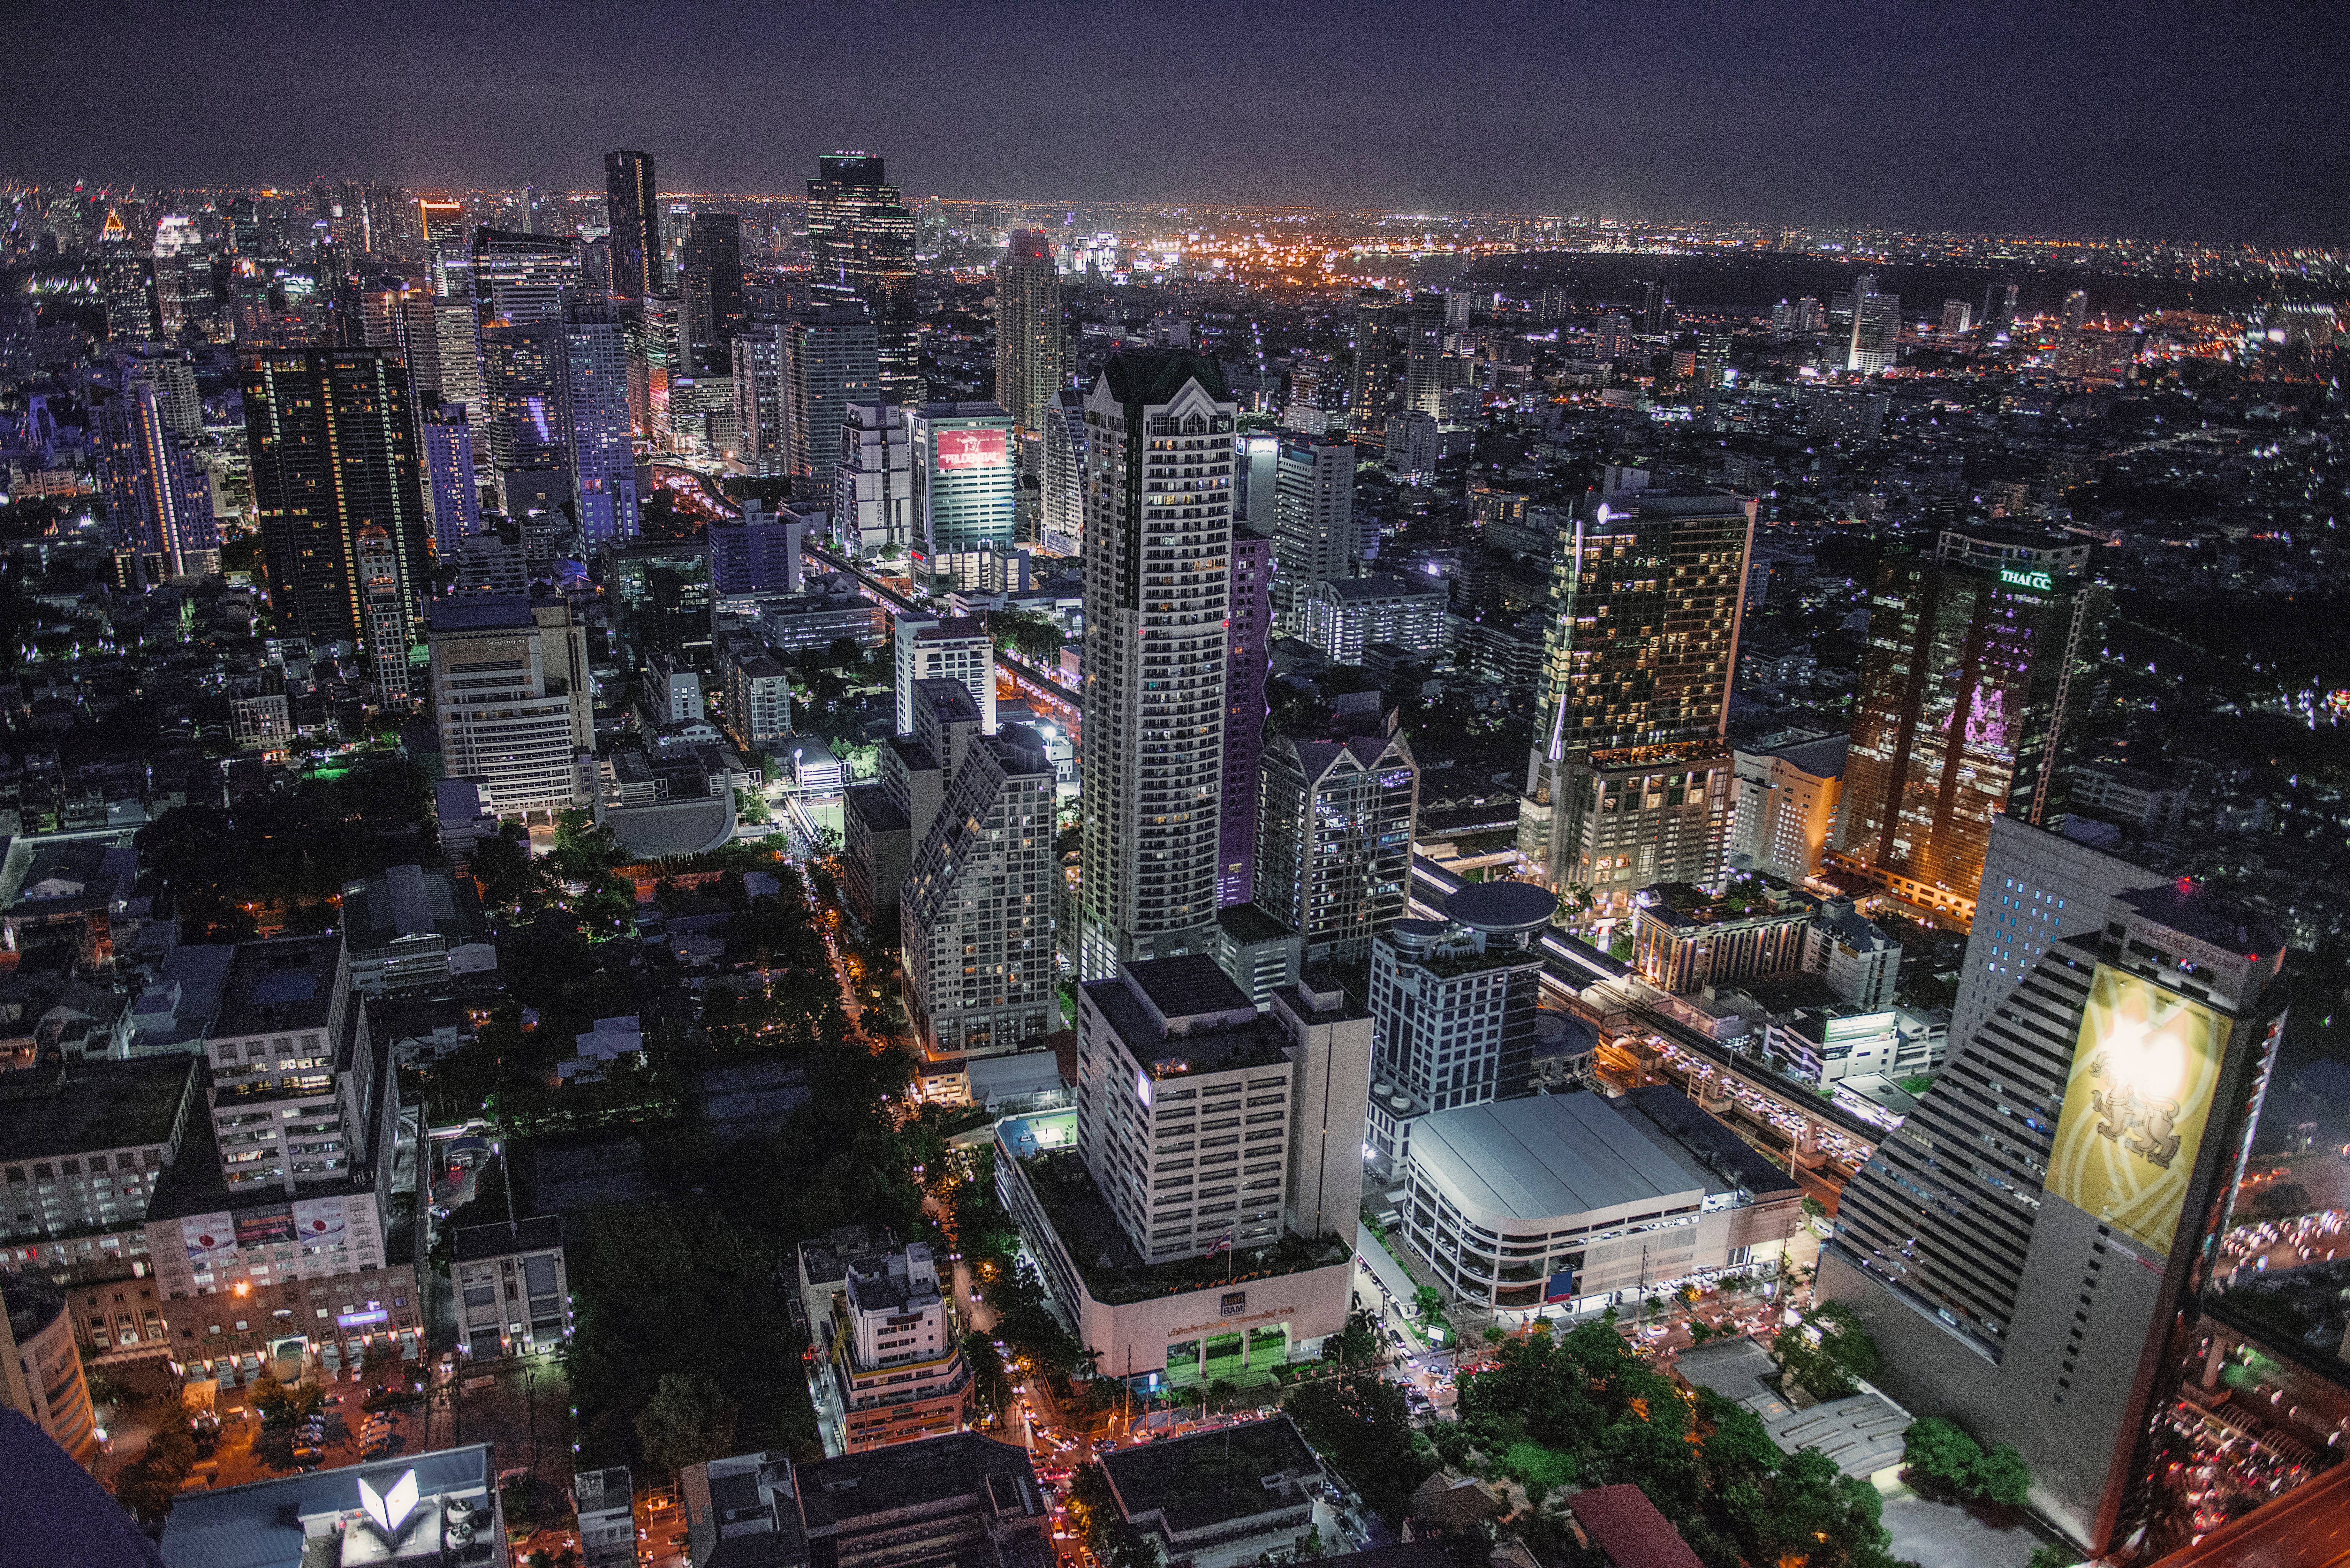 The city of Bangkok at nightfall with skyscrapers and lights